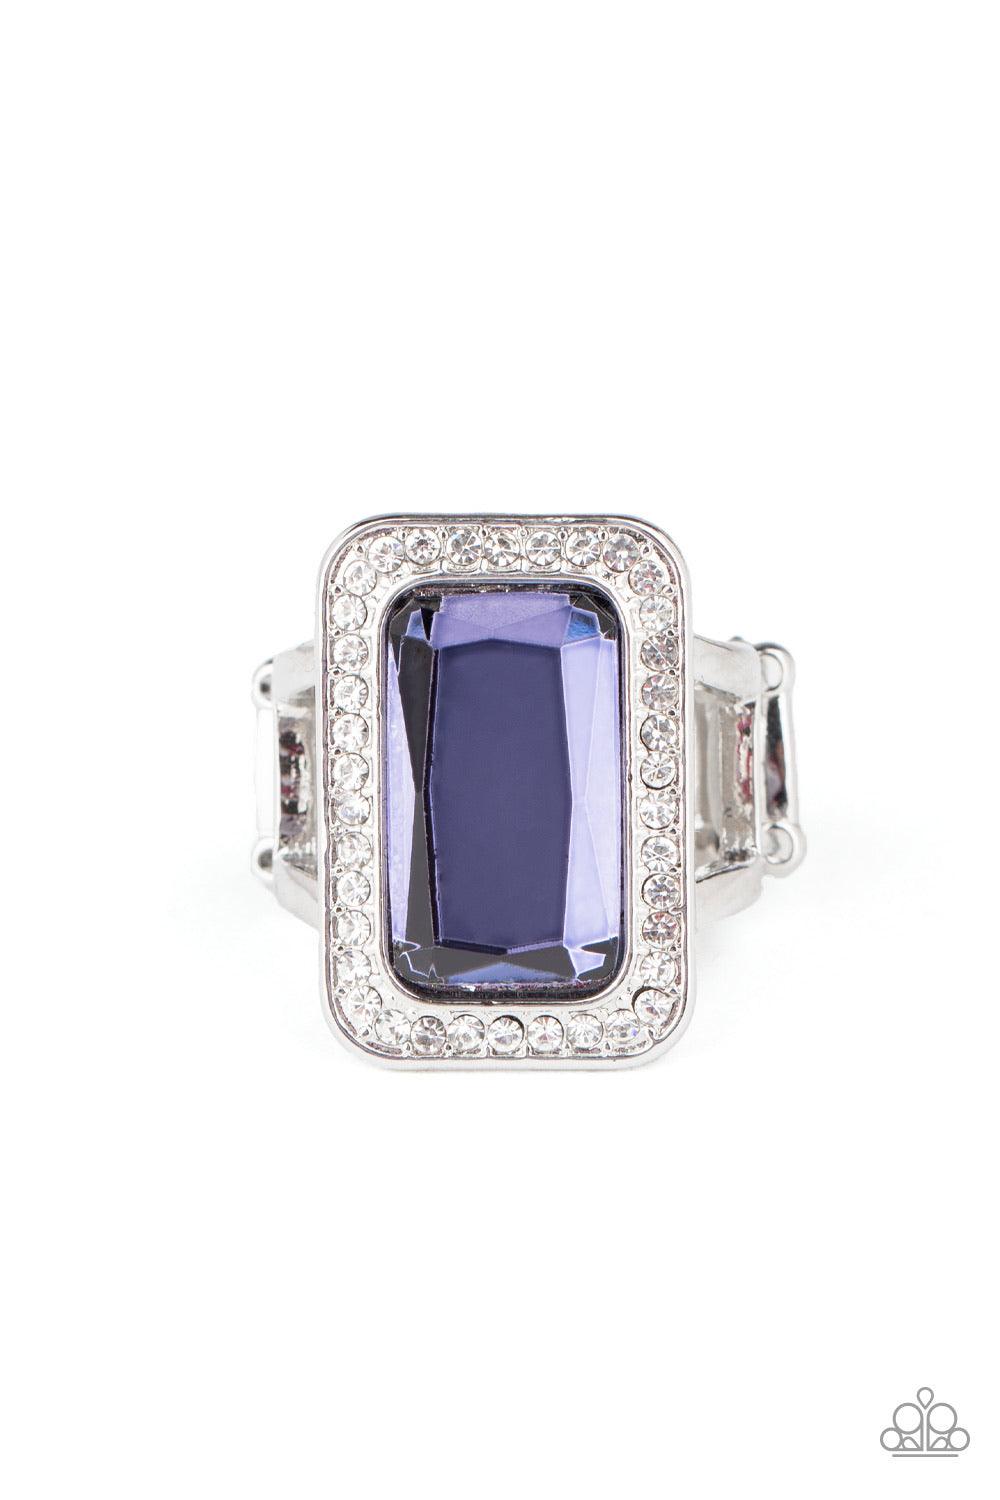 Paparazzi Accessories Crown Jubilee - Purple Featuring a regal emerald style cut, an oversized purple gem is bordered by a silver frame encrusted in glassy white rhinestones for a glamorous look. Features a stretchy a band for a flexible fit. Sold as one